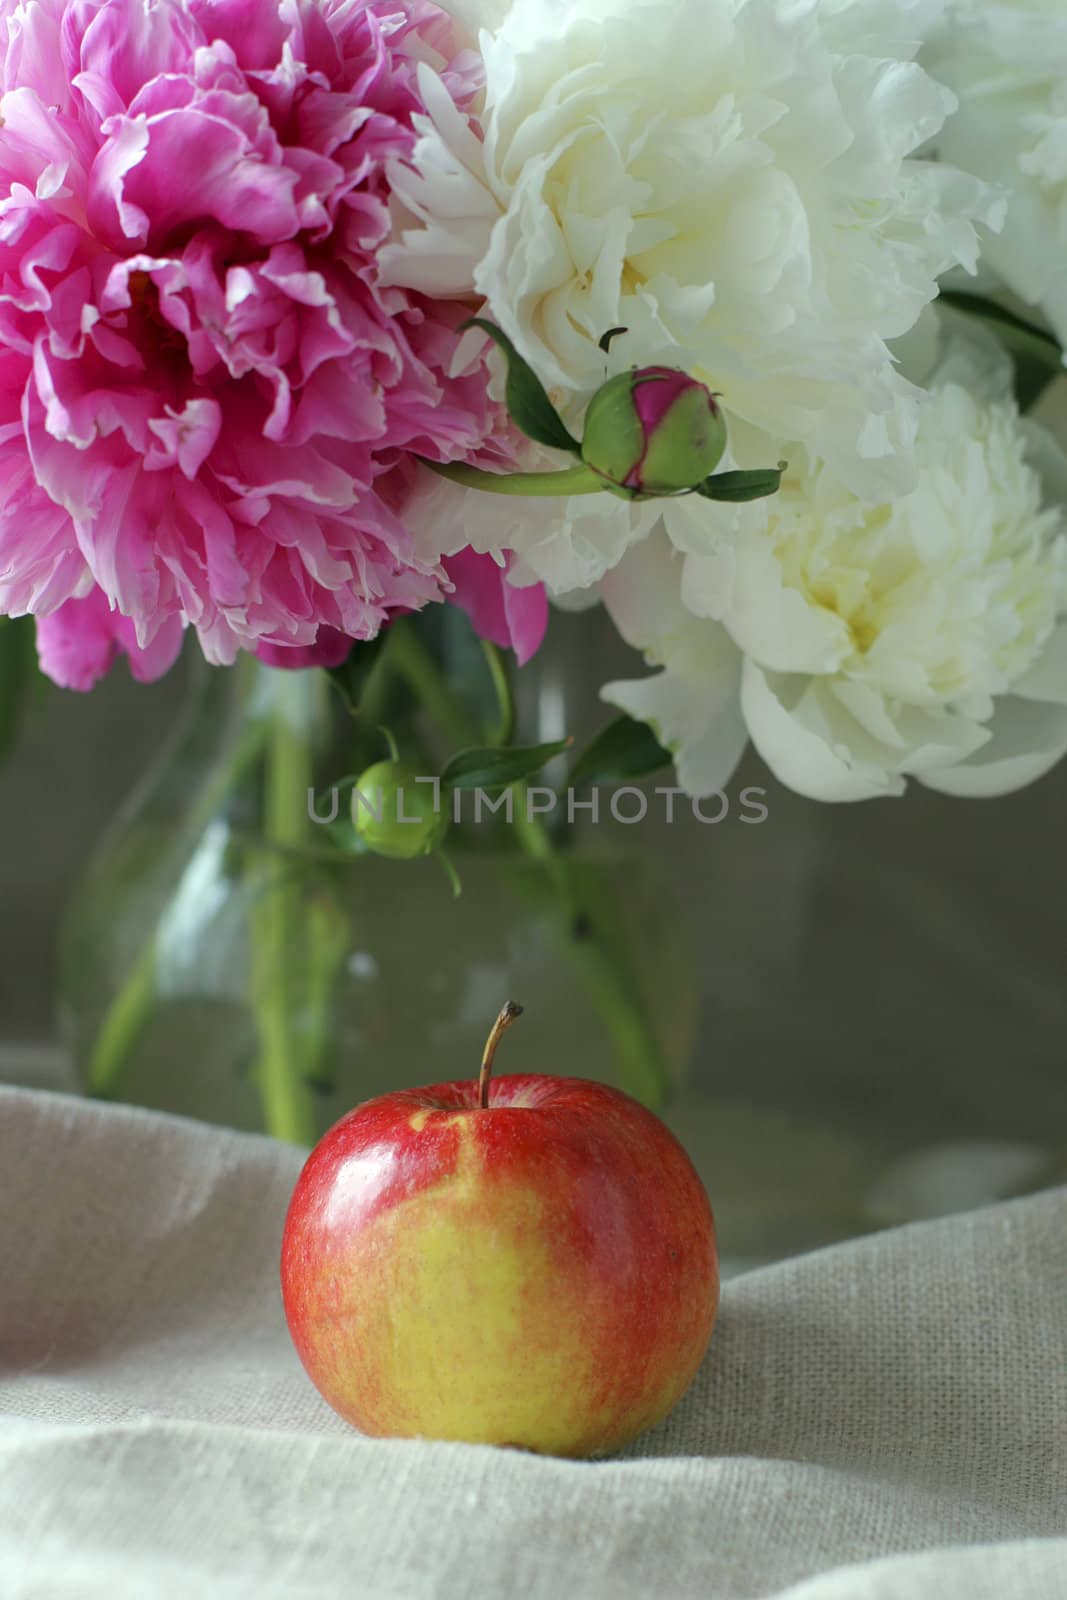 Flowers and apple on the table.